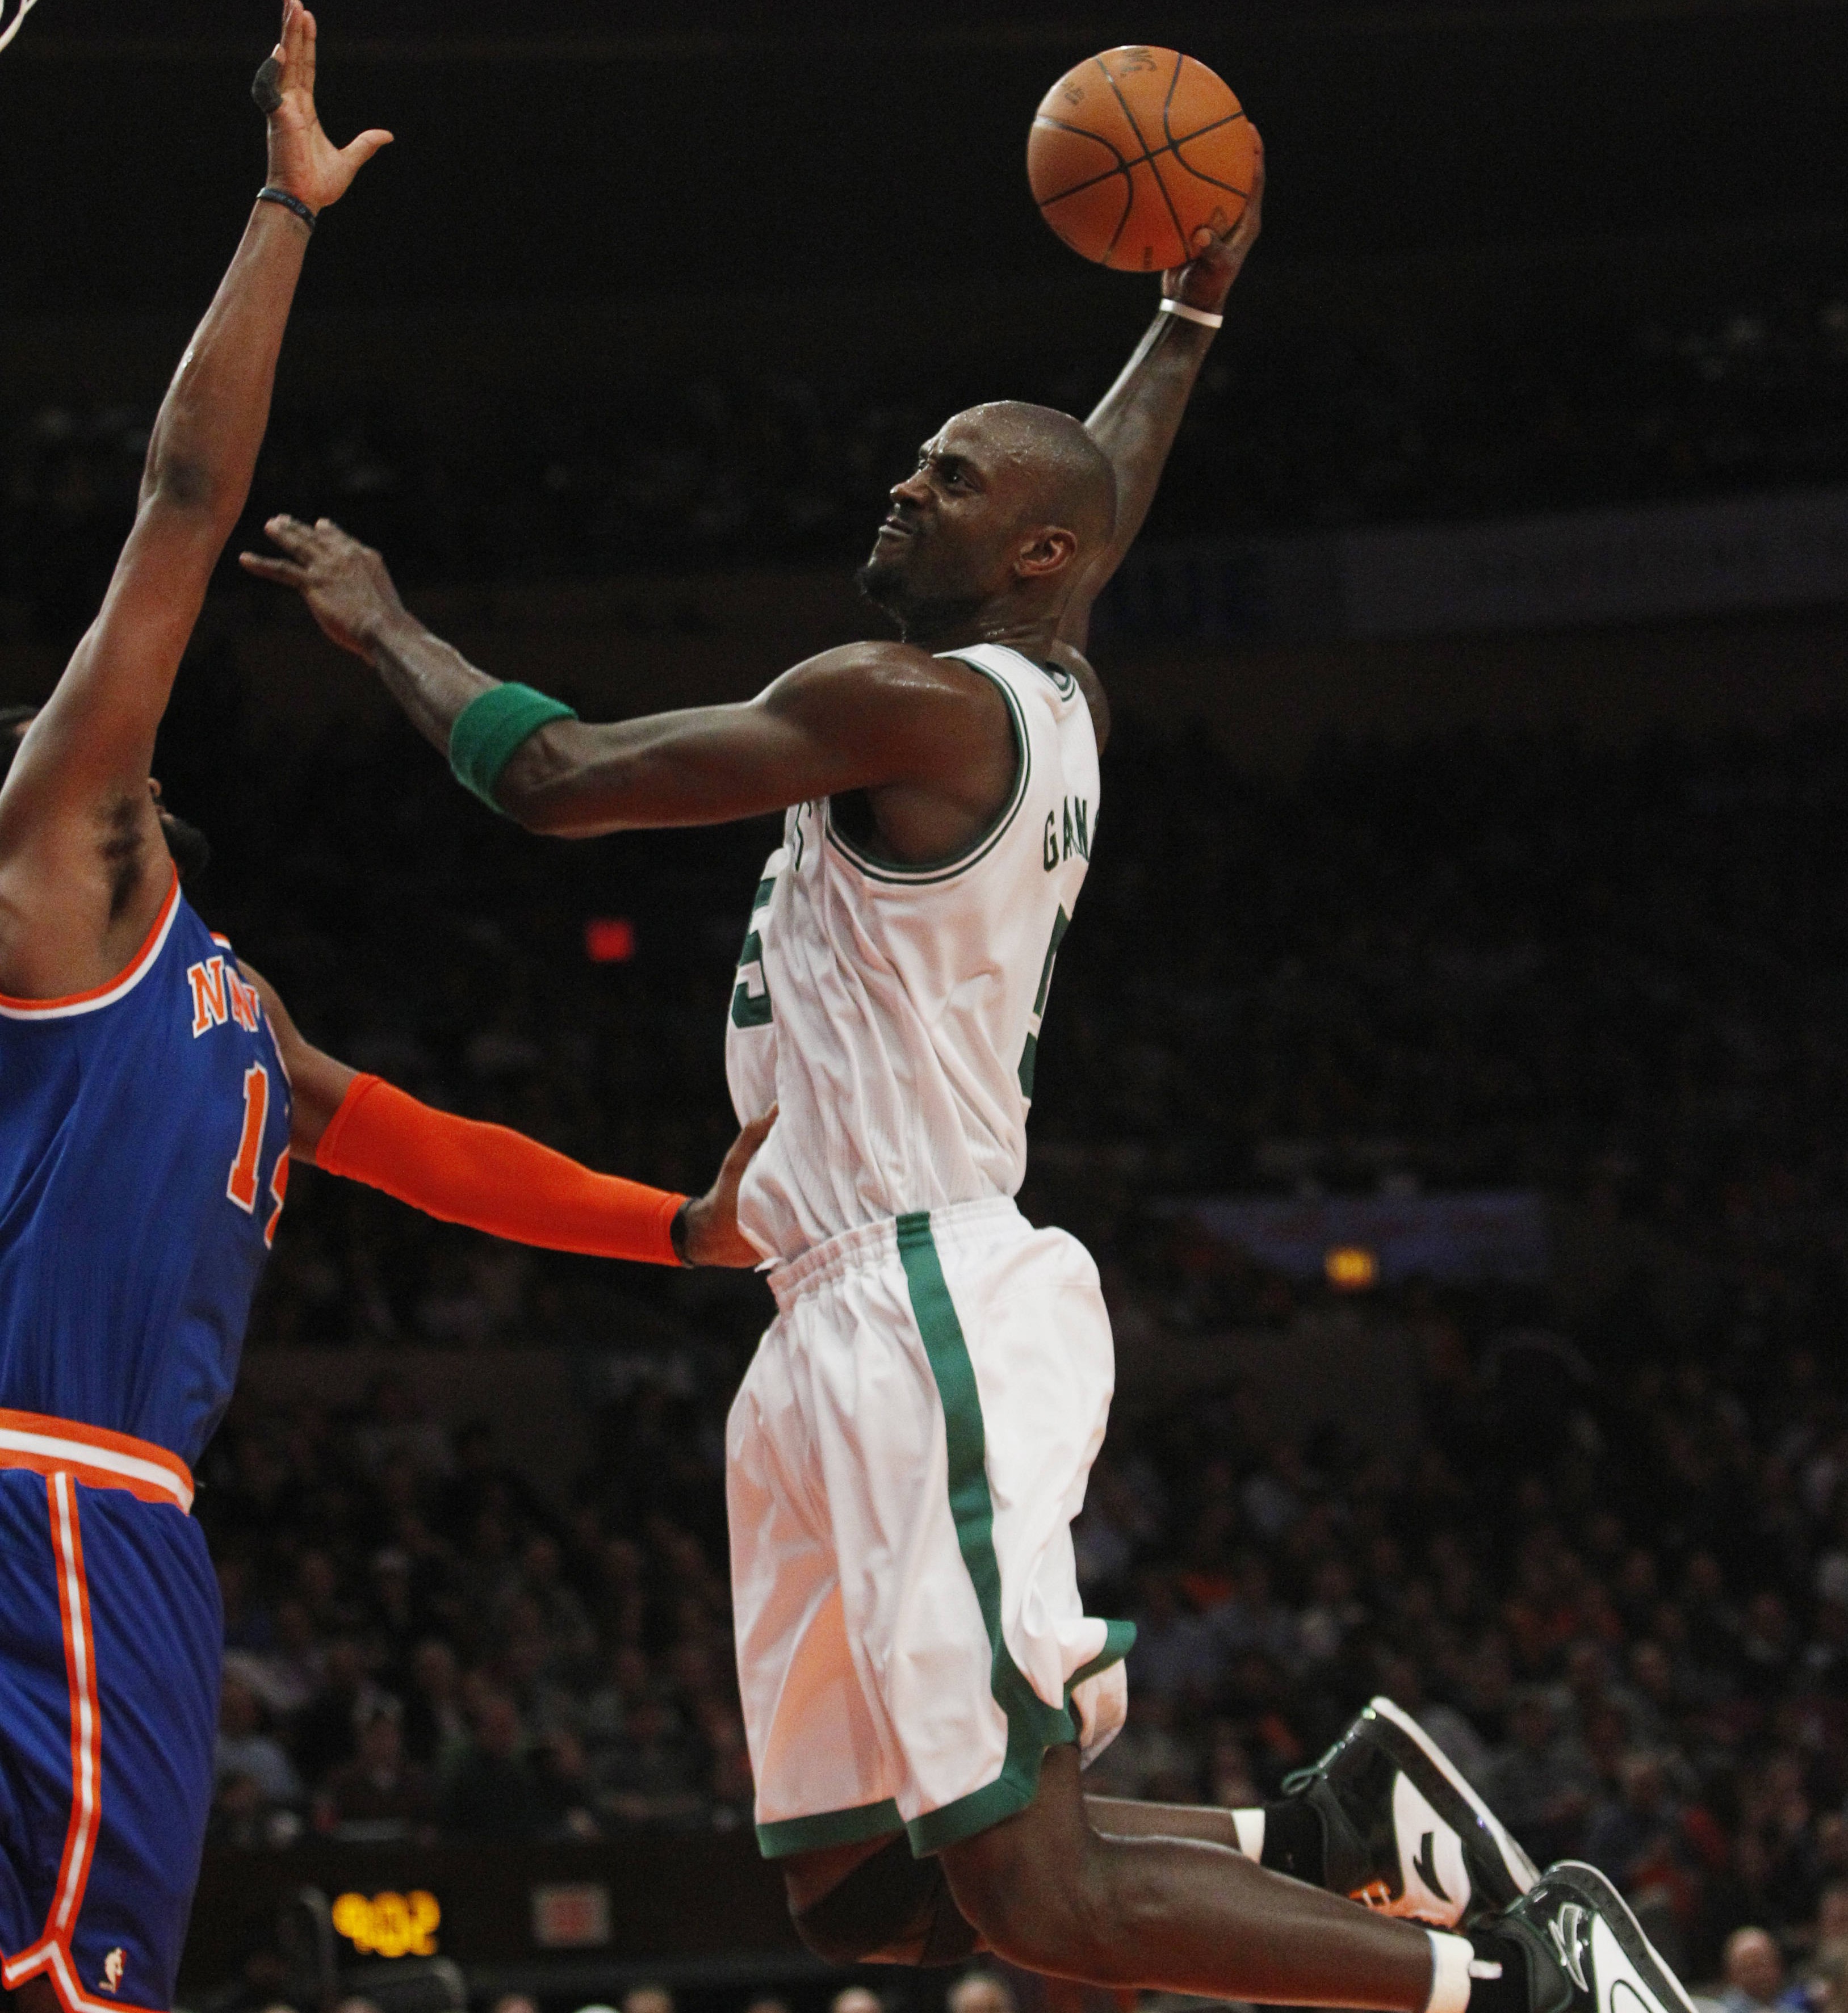 Boston Celtics' Kevin Garnett (5) dunks the ball on New York Knicks' Ronny Turiaf during the second half of an NBA basketball game Monday, March 21, 2011, in New York. The Celtics won the game 96-86. (AP Photo/Frank Franklin II)